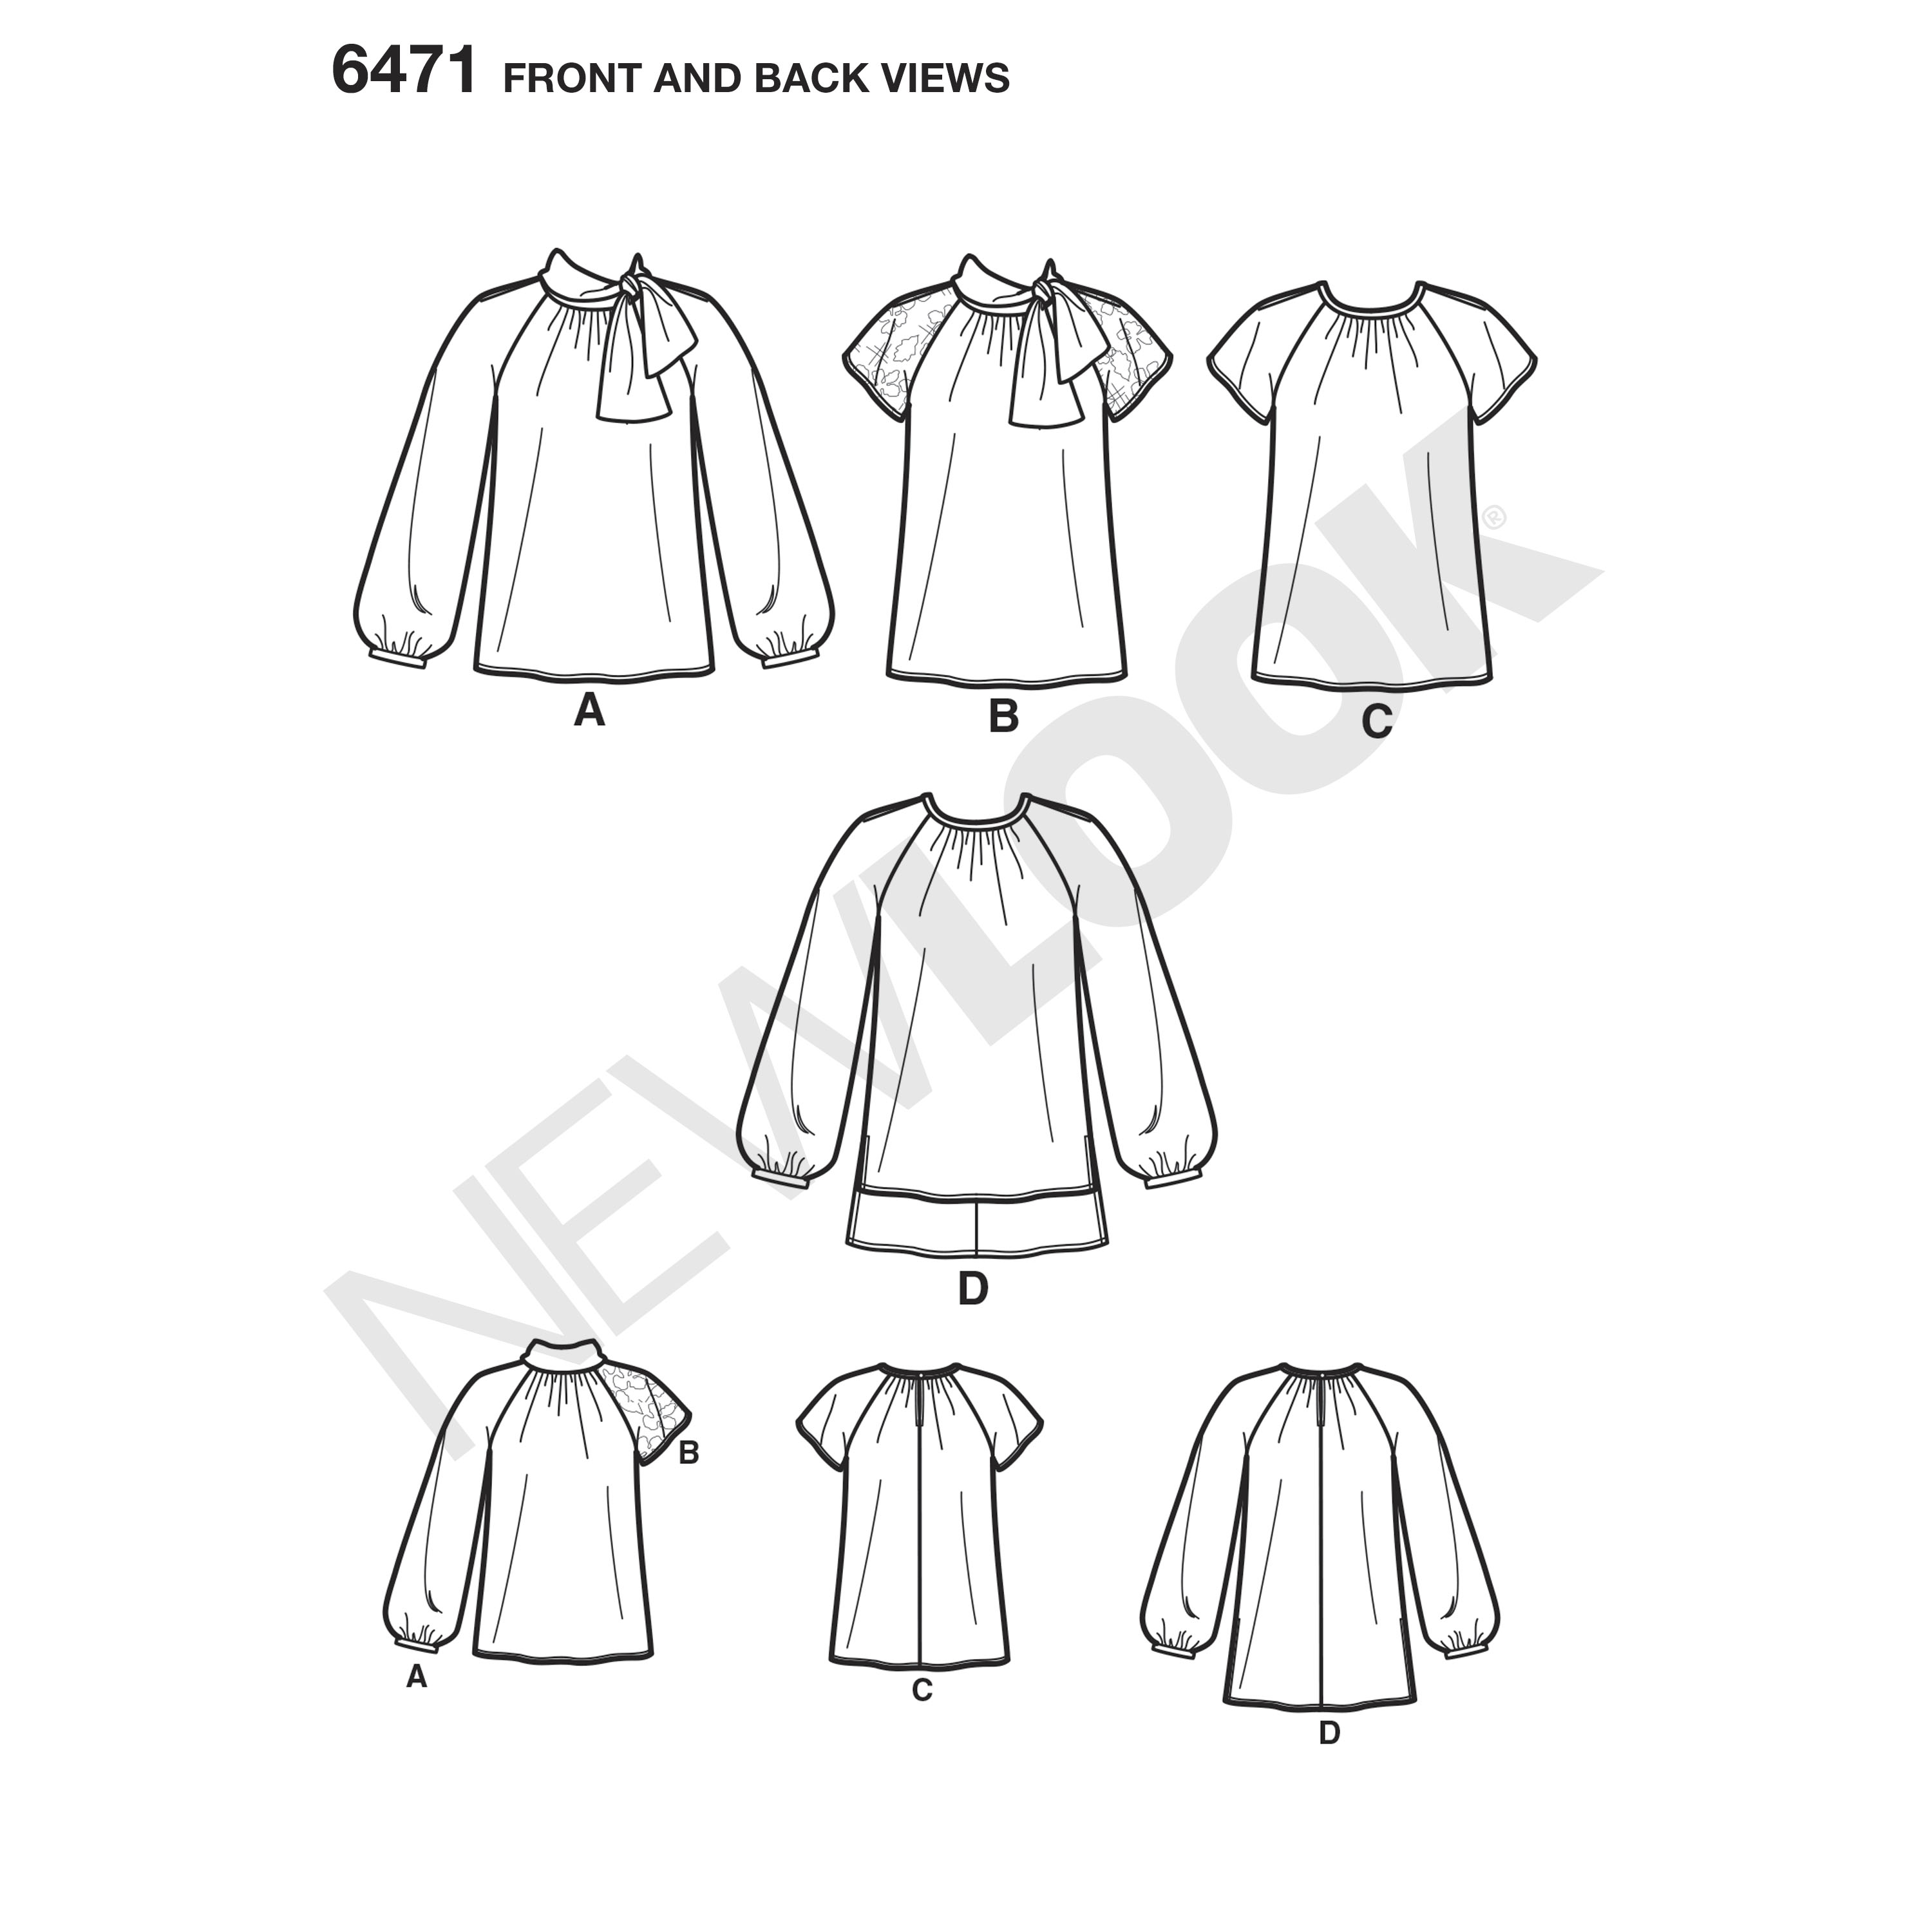 New Look 6471 Misses' Blouses and Tunic with Neckline Variations